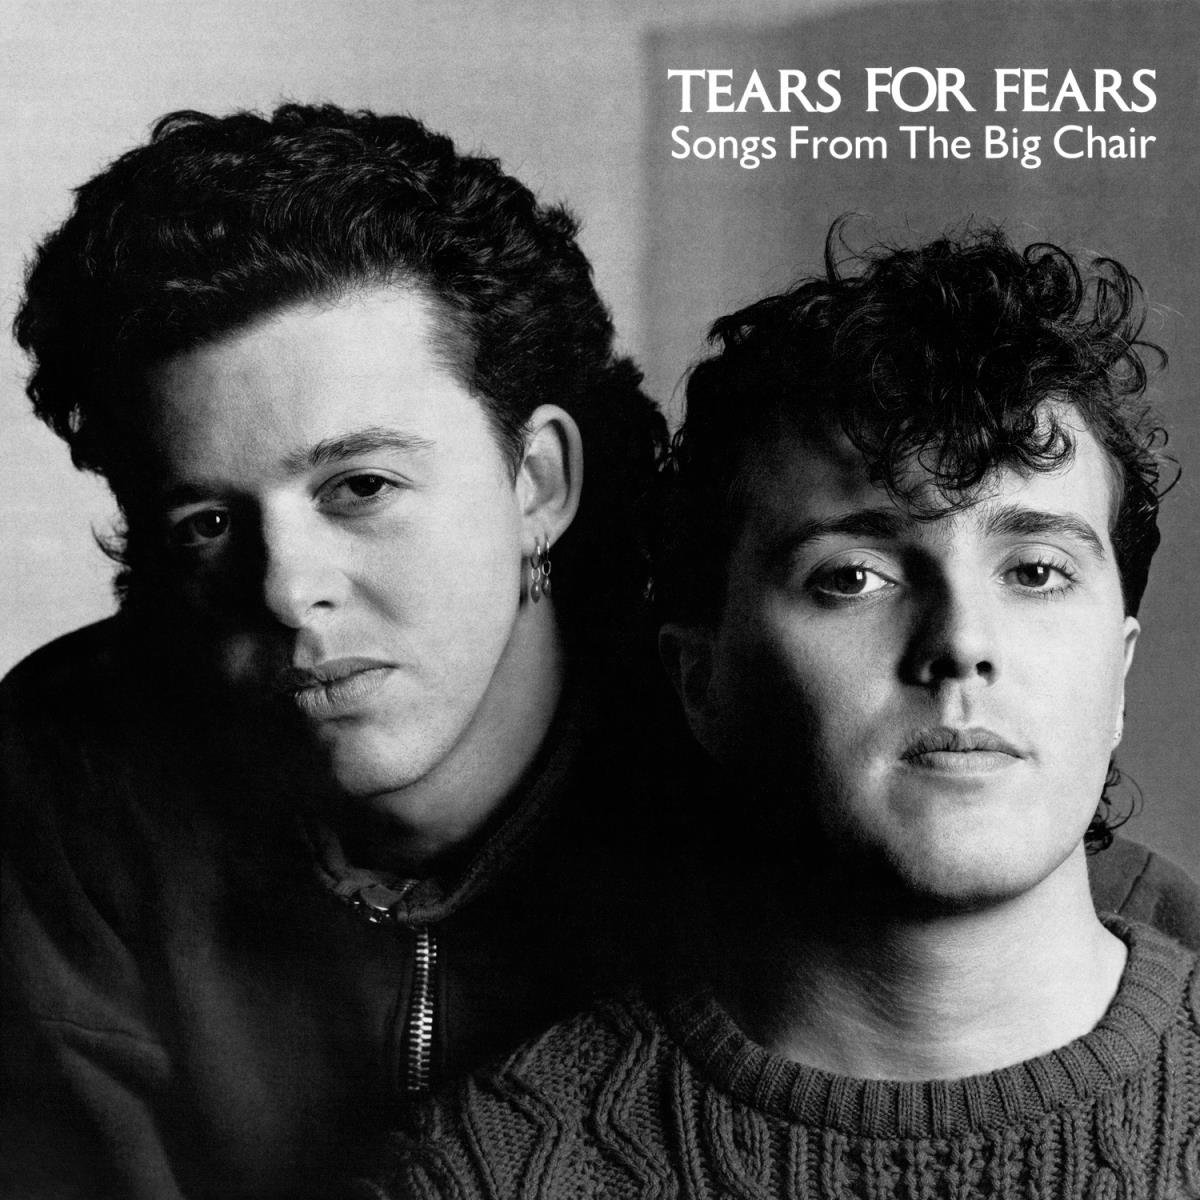 <p>While many fans latched on to the synth pop sound of their first album, it was the band’s second release, <a href="https://pitchfork.com/reviews/albums/tears-for-fears-songs-from-the-big-chair/" class="CMY_Link CMY_Valid"><em>Songs from the Big Chair</em></a>, that brought them <a href="https://www.allmusic.com/artist/tears-for-fears-mn0000019892/biography?1645121287387" class="CMY_Link CMY_Redirect CMY_Valid">true stardom</a>. The 1985 pop album <a href="http://www.musicpopstars.com/tears-for-fears/biography/prt.html" class="CMY_Link CMY_Valid">sold more than 10 million copies</a> worldwide, topped the U.S. charts for five weeks, and spent six months in the UK top 10.</p>